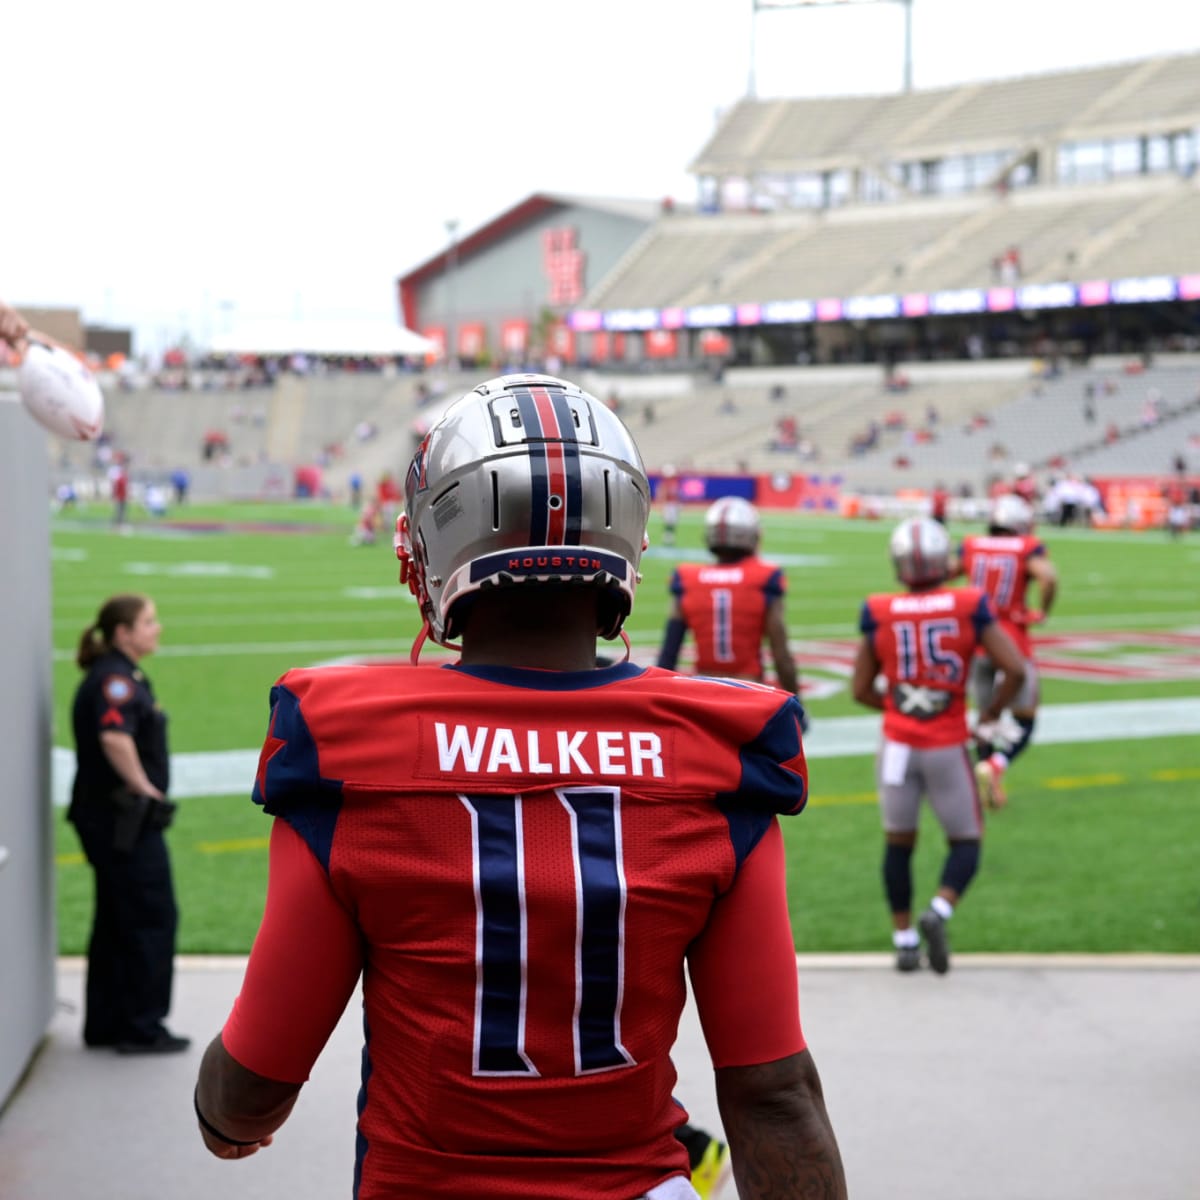 Former Temple quarterback P.J. Walker is one of the XFL's early stars 